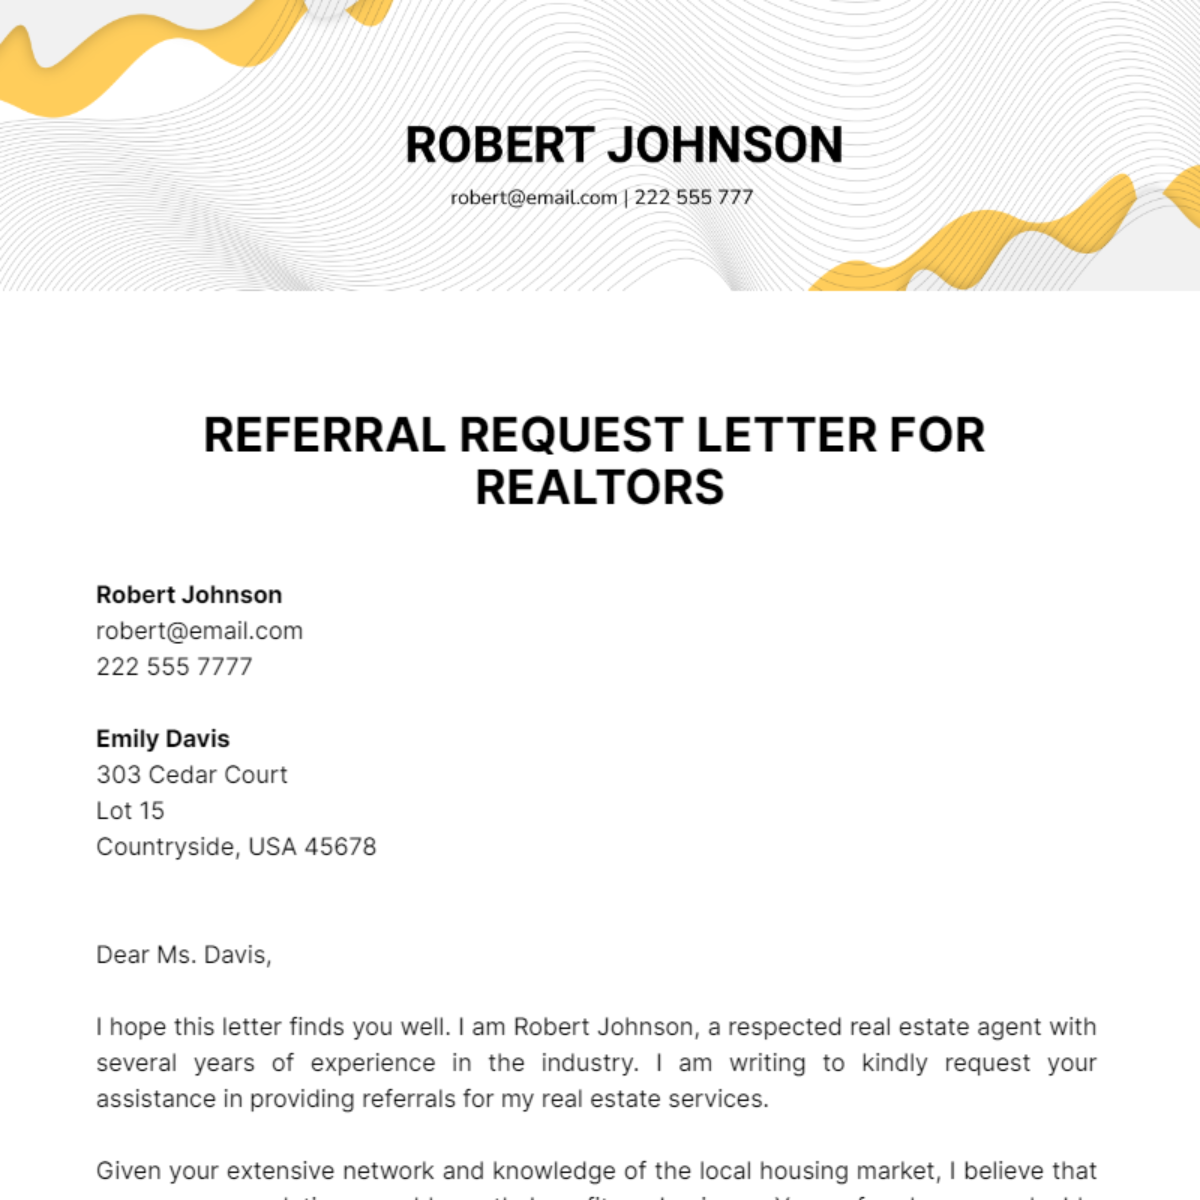 Referral Request Letter For Realtors  Template